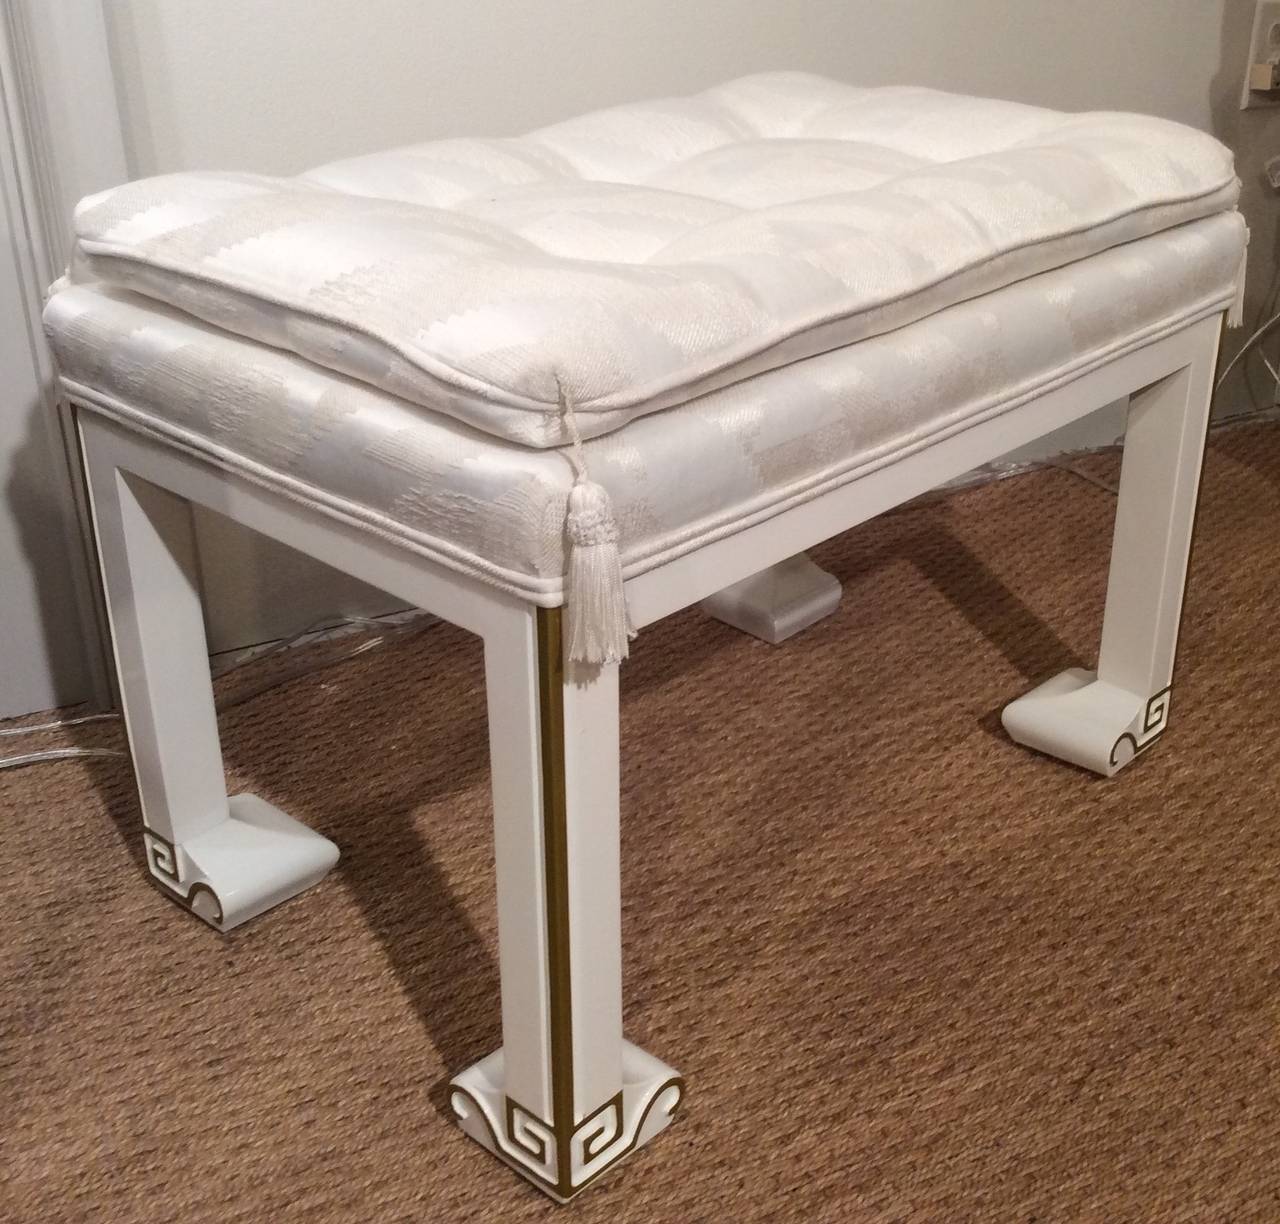 Chic newly lacquered bench or ottoman base, in a warm white tone, with gold painted Greek key design. Button tufted tone-on-tone original upholstered cushion top, with similar tonal white tassels from all four corners. Base is excellent and